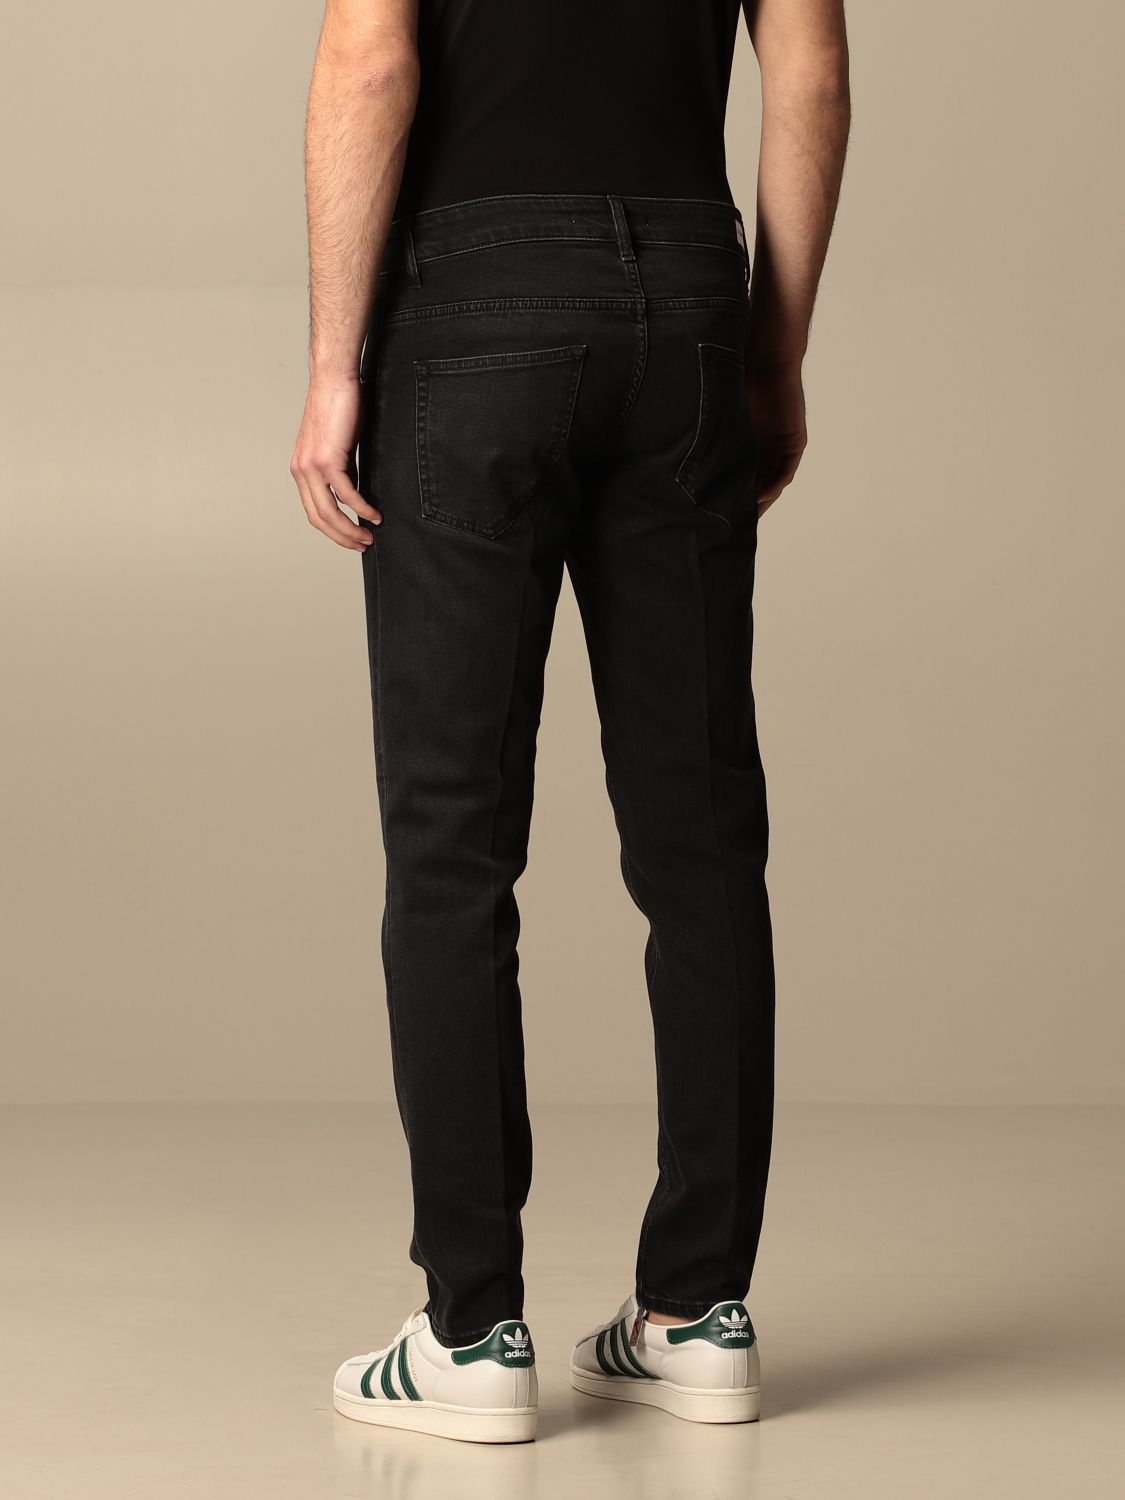 Jeans Don The Fuller: Jeans a 5 tasche Don The Fuller in denim scuro nero 2